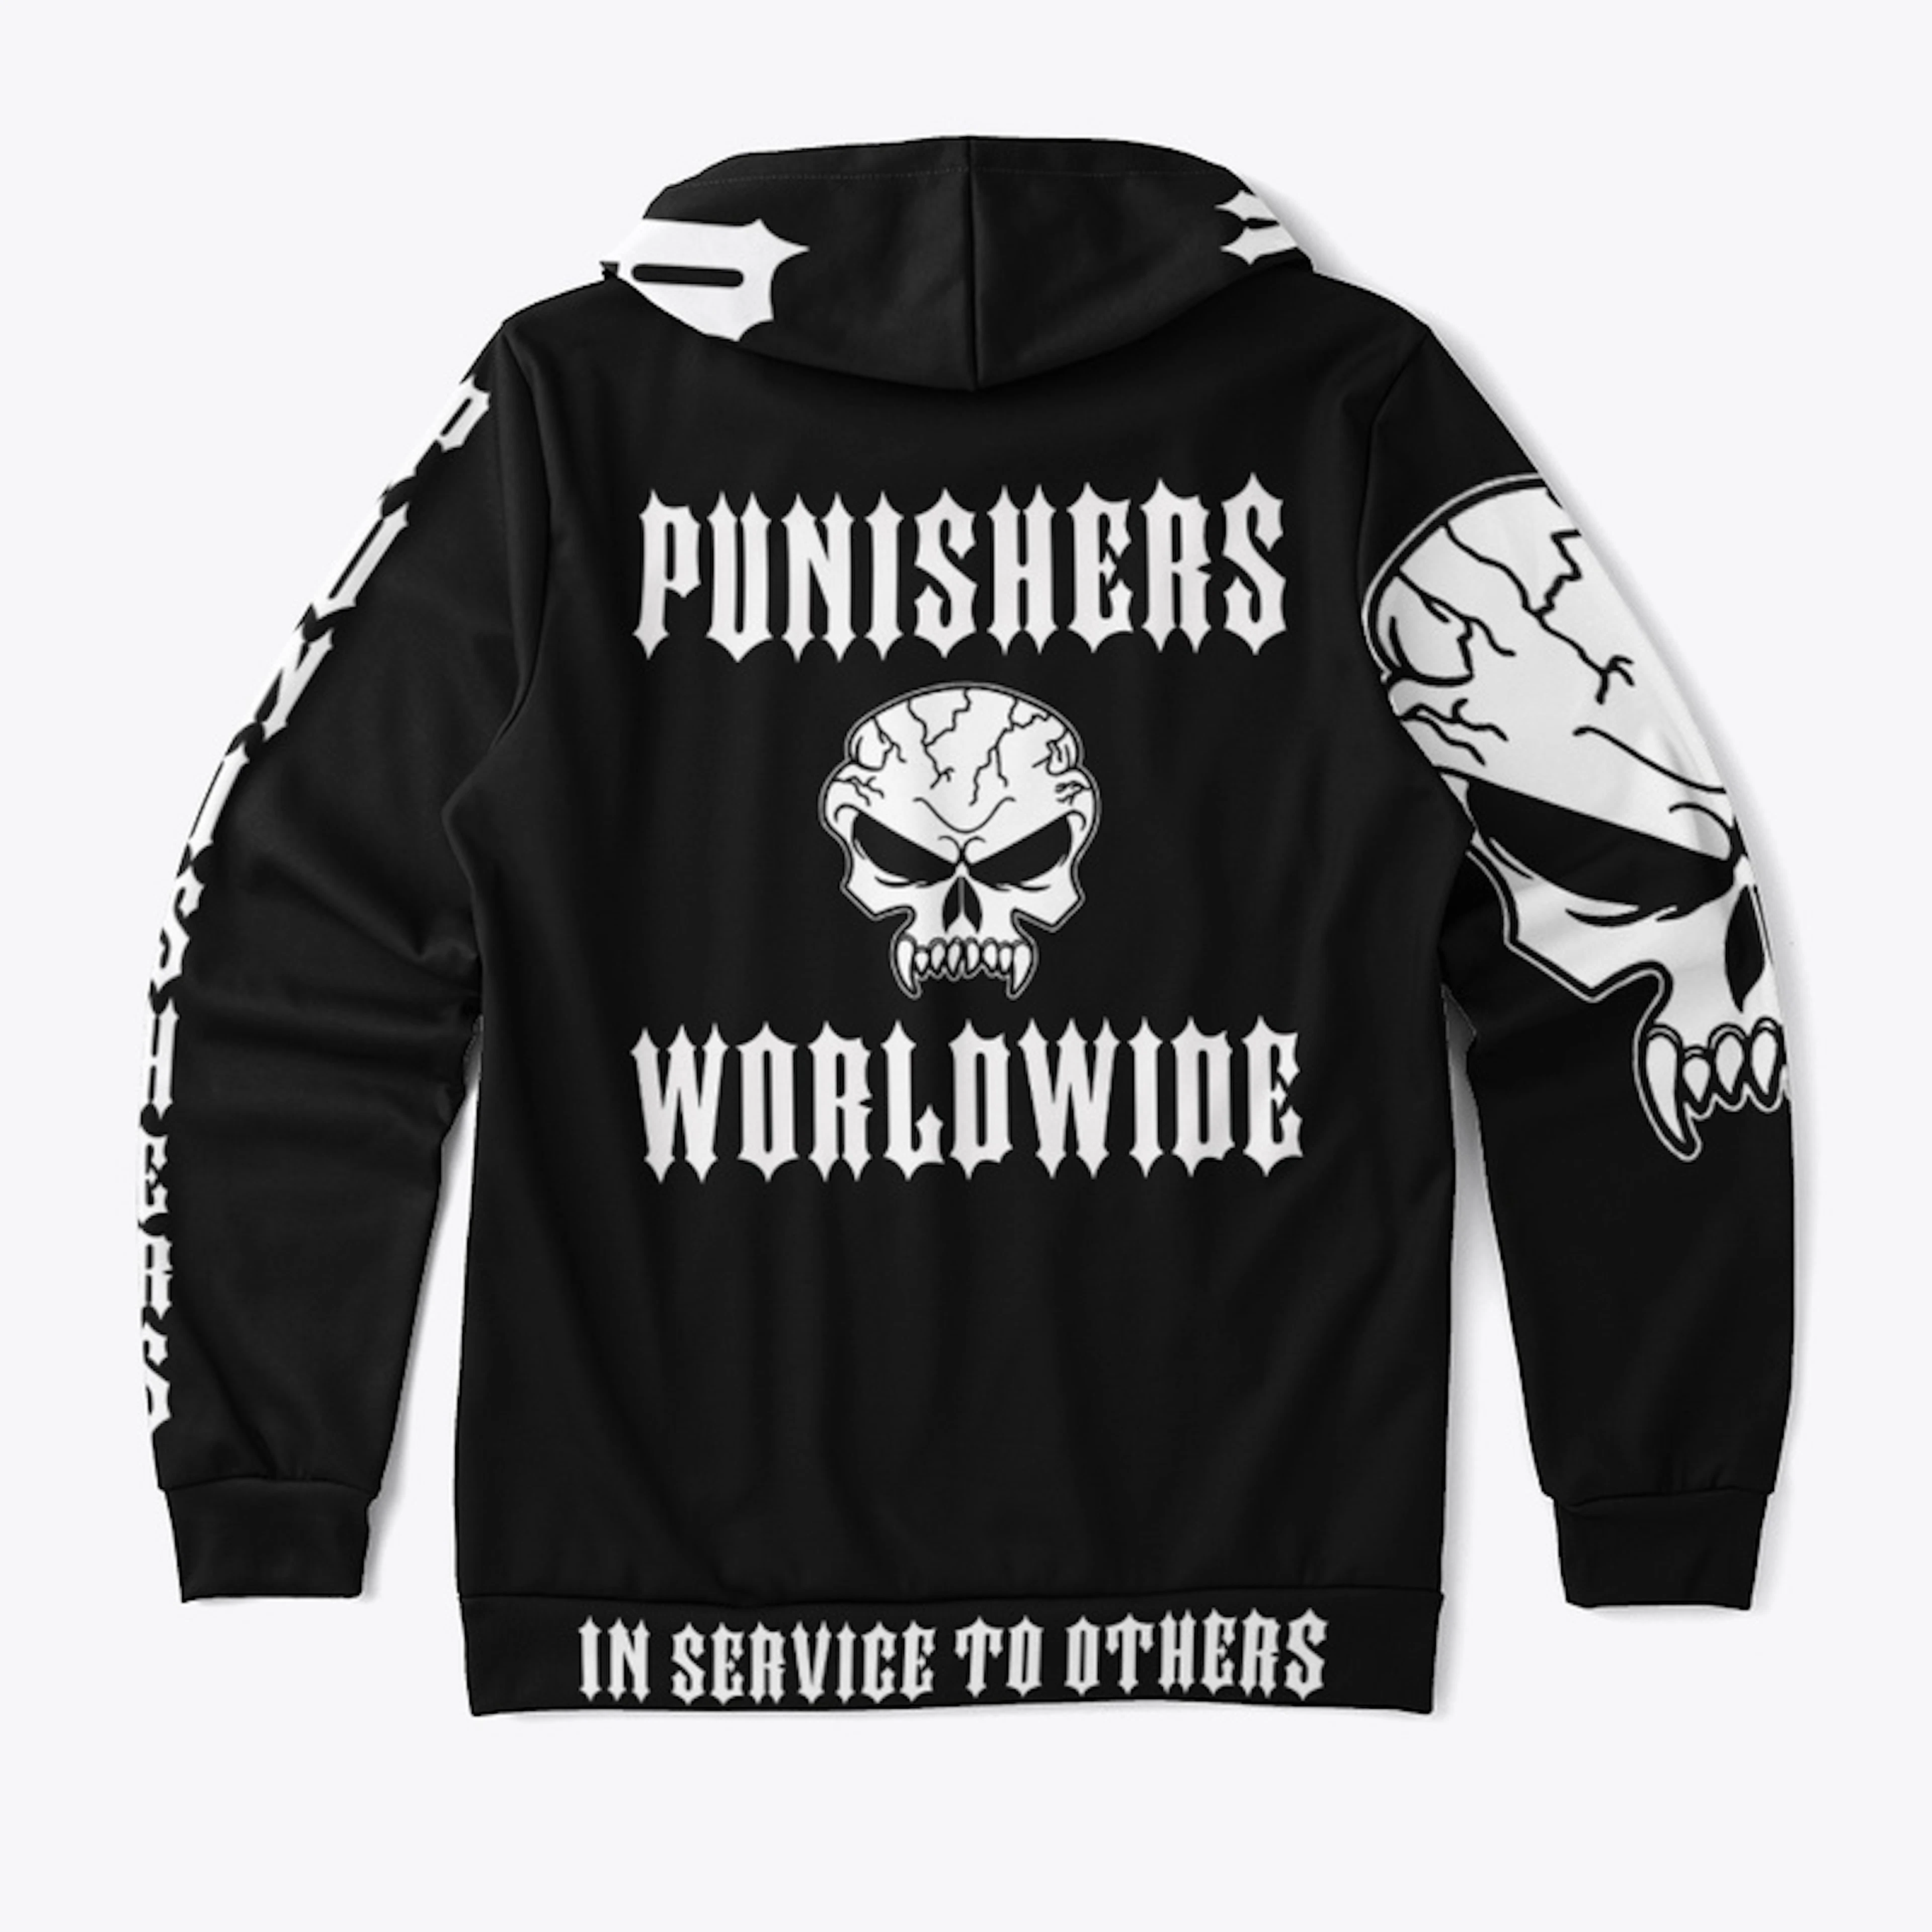 PUNISHERS All Over Print Hoodie (NEW)